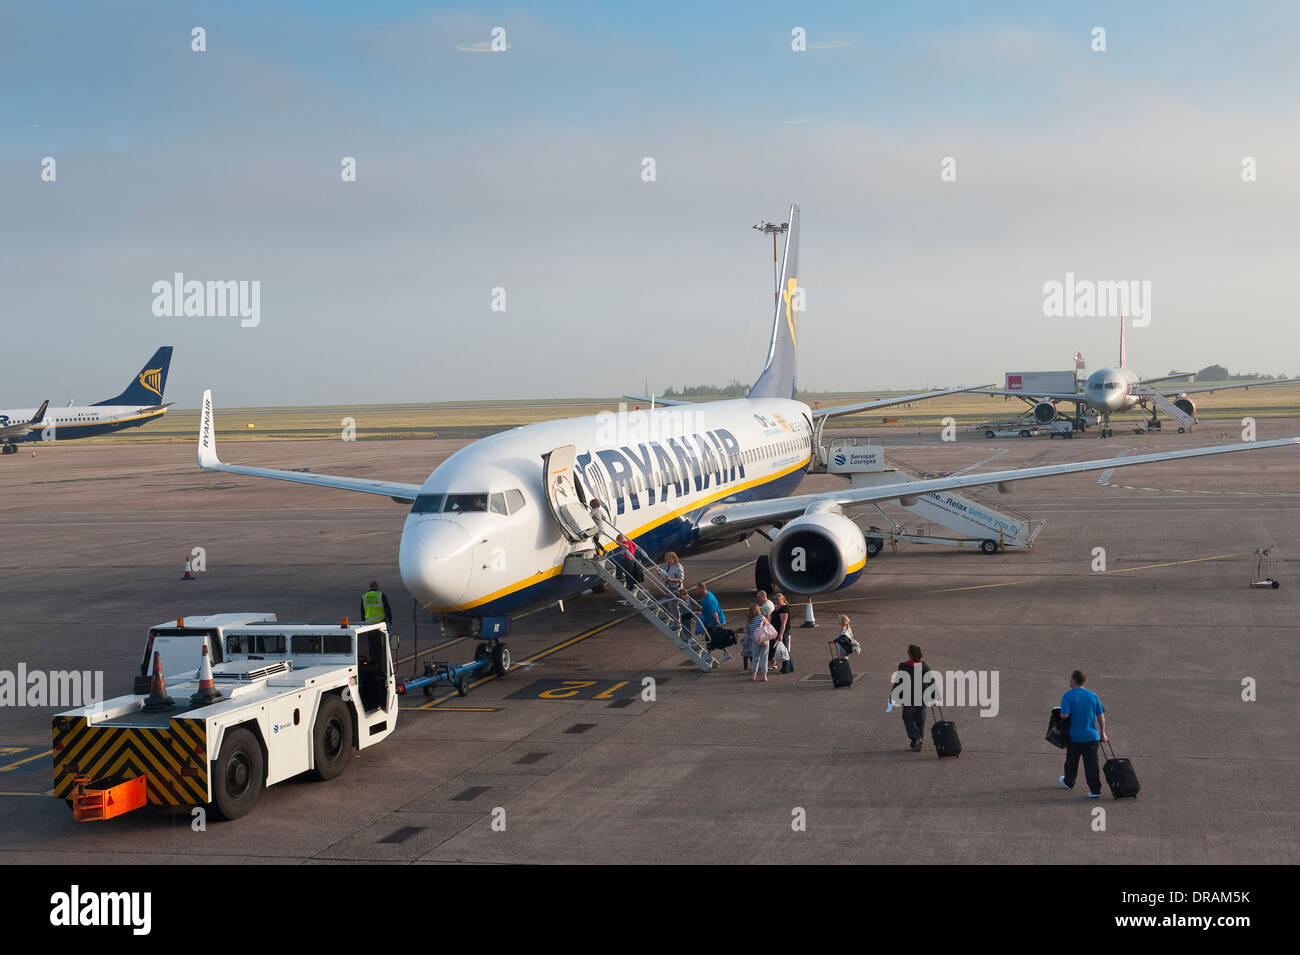 Passengers boarding a Ryanair plane at an airport. Stock Photo